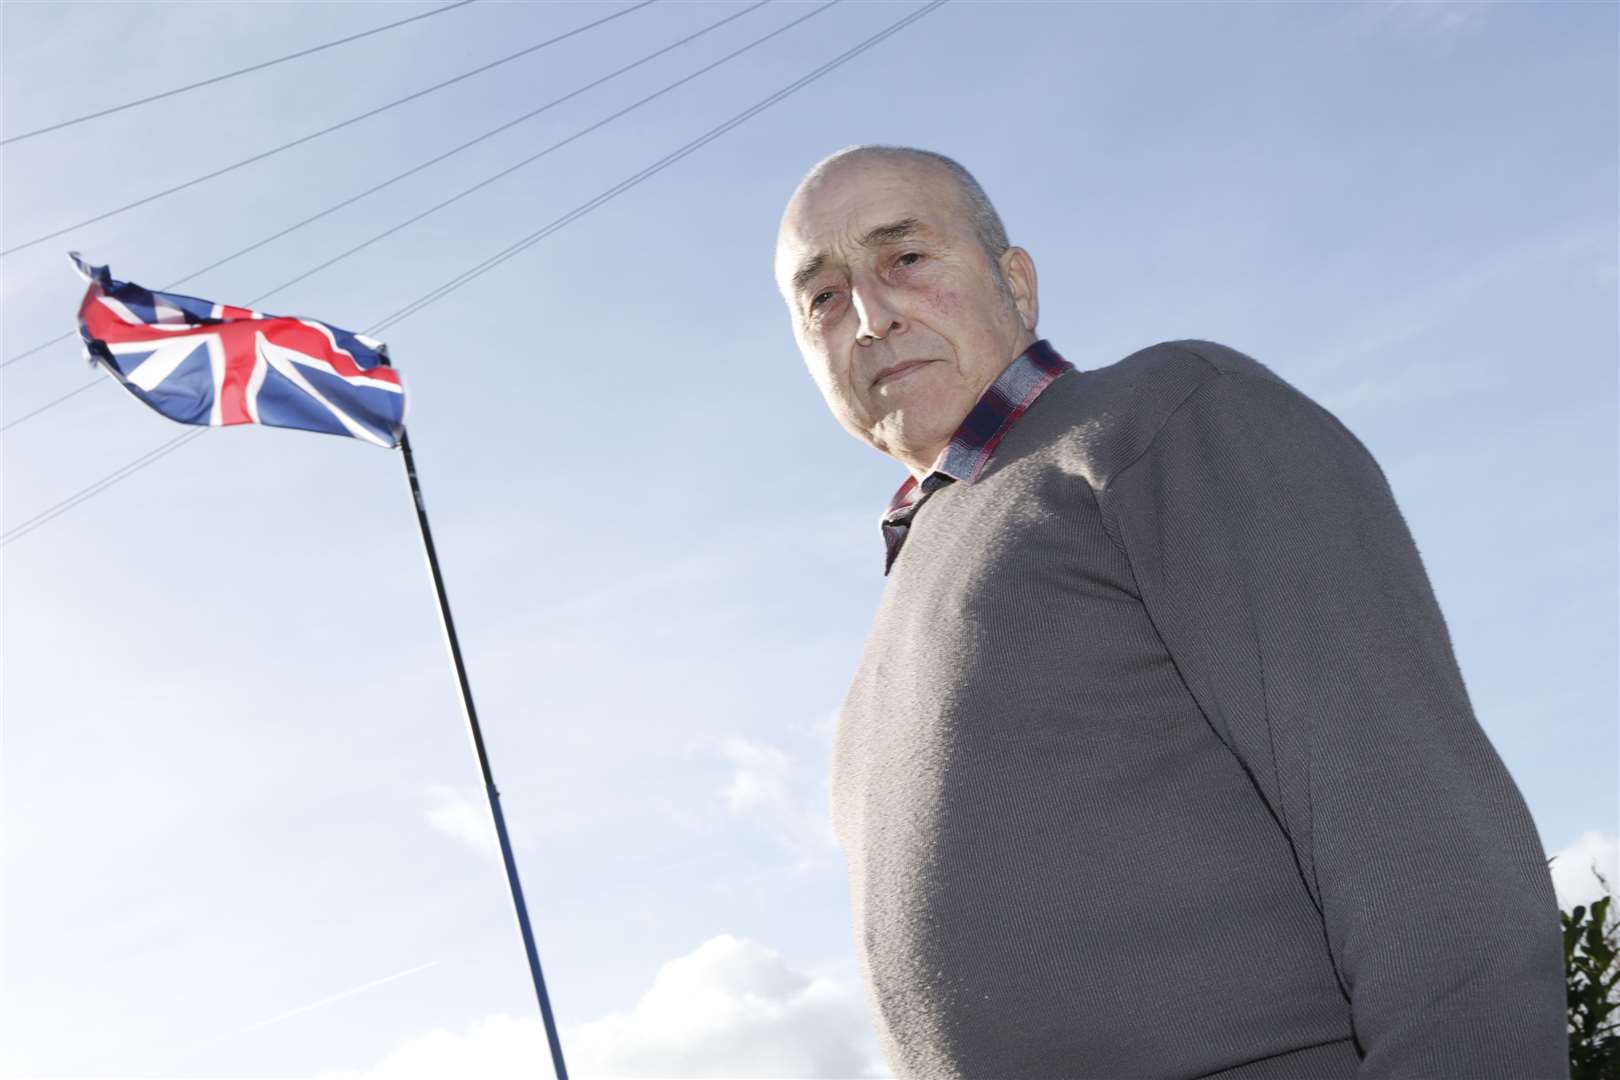 Len Carey flew the flag in honour of his Dad - who was wounded in the First World War